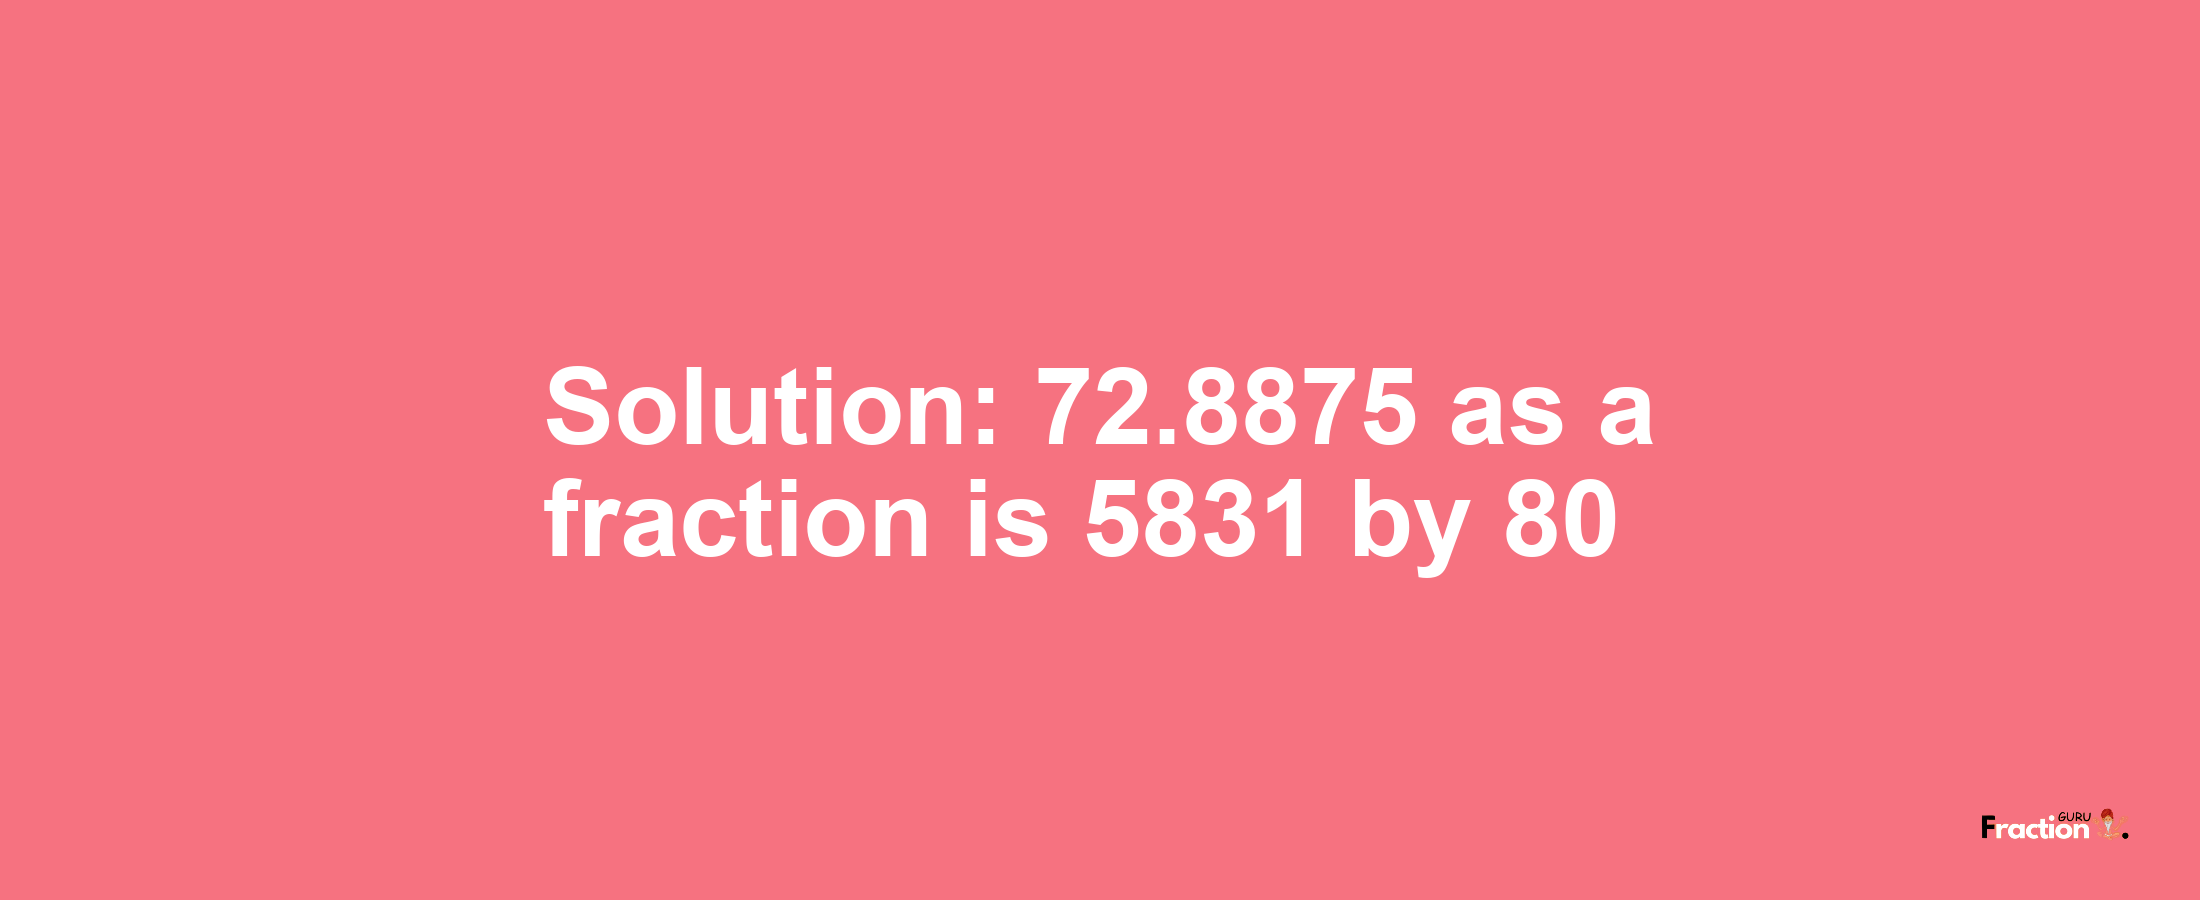 Solution:72.8875 as a fraction is 5831/80